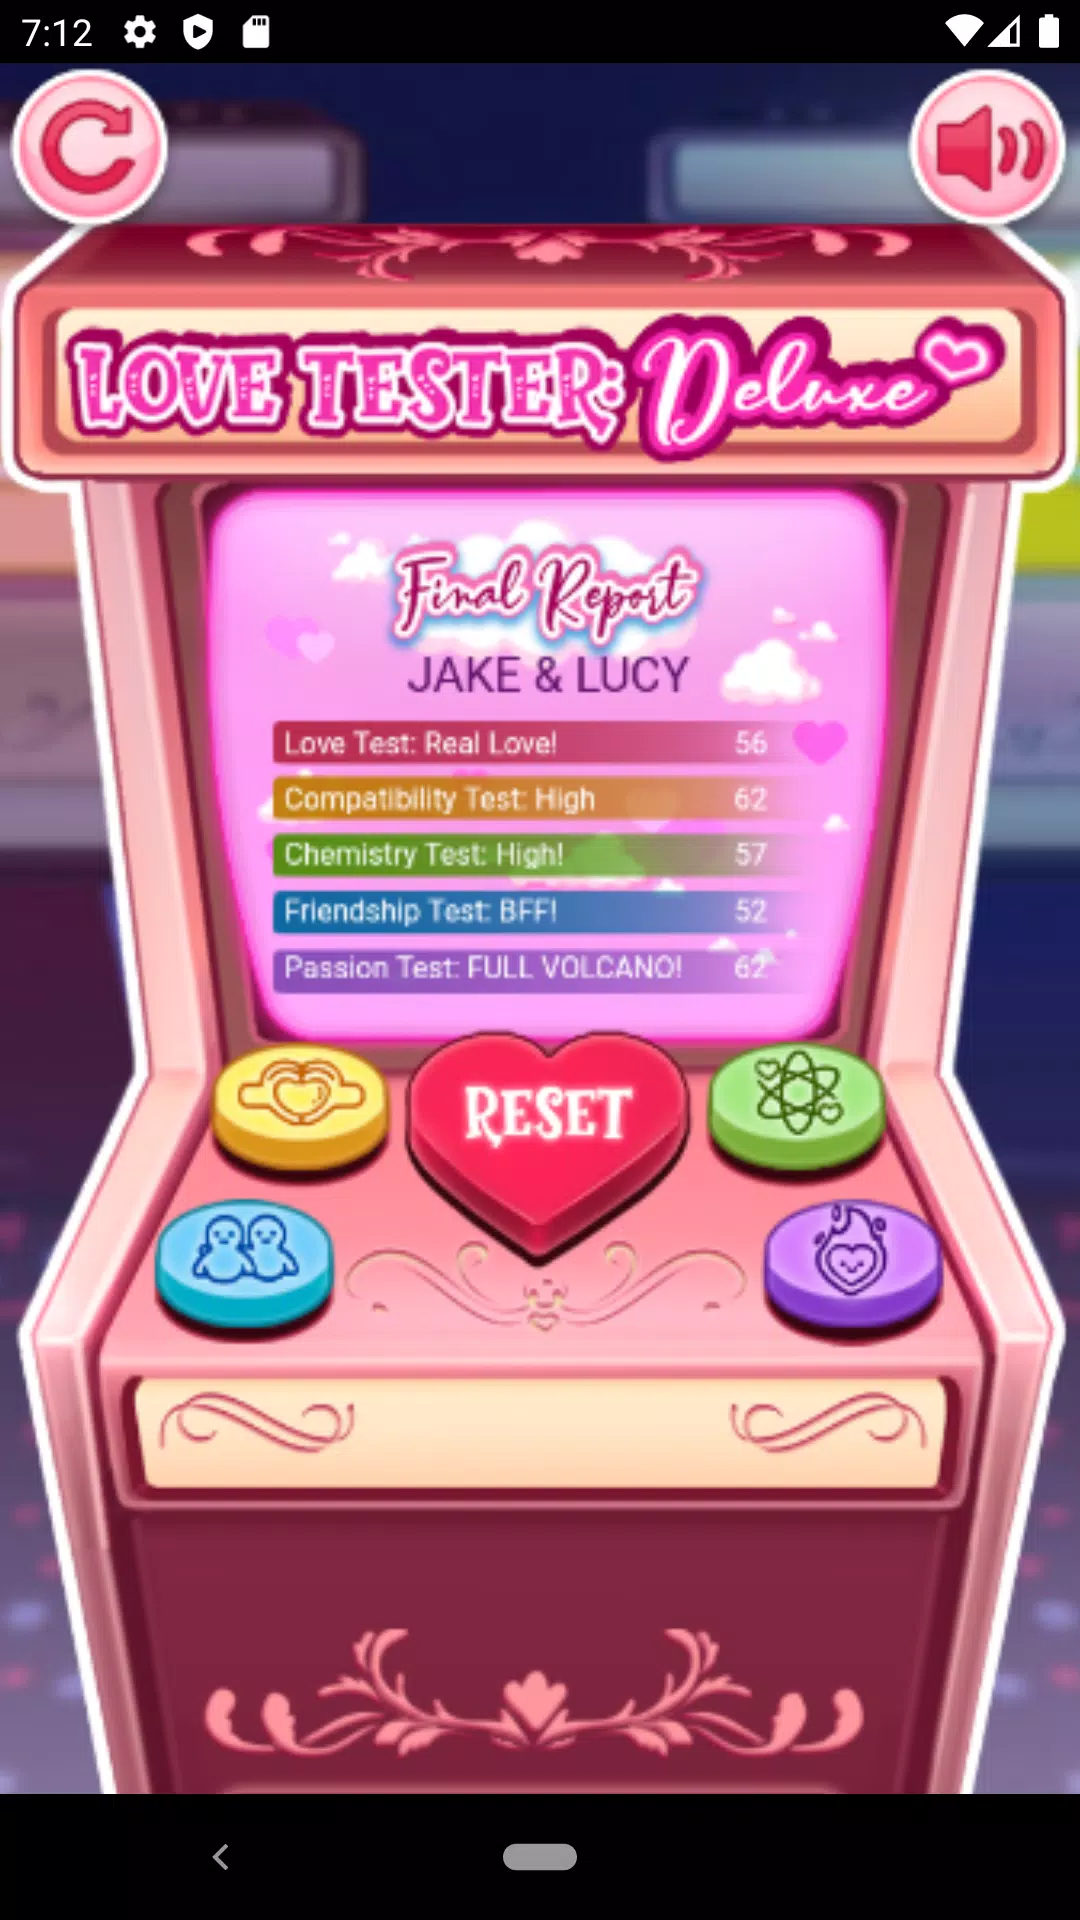 Love Tester - Play The Free Mobile Game Online